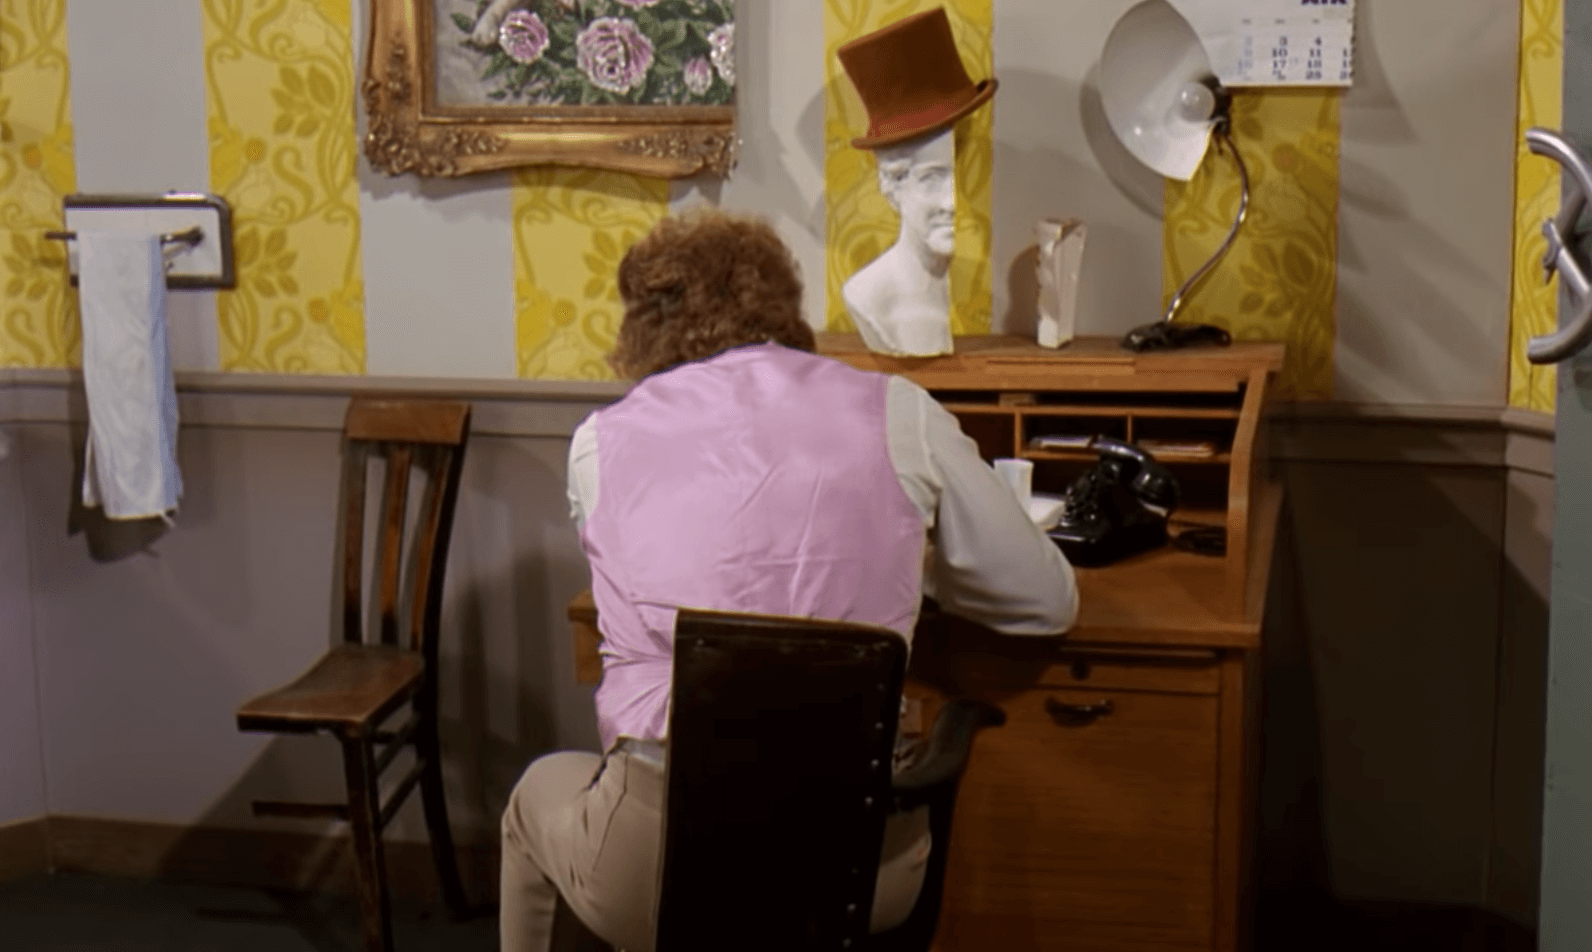 Willy Wonka at his desk.